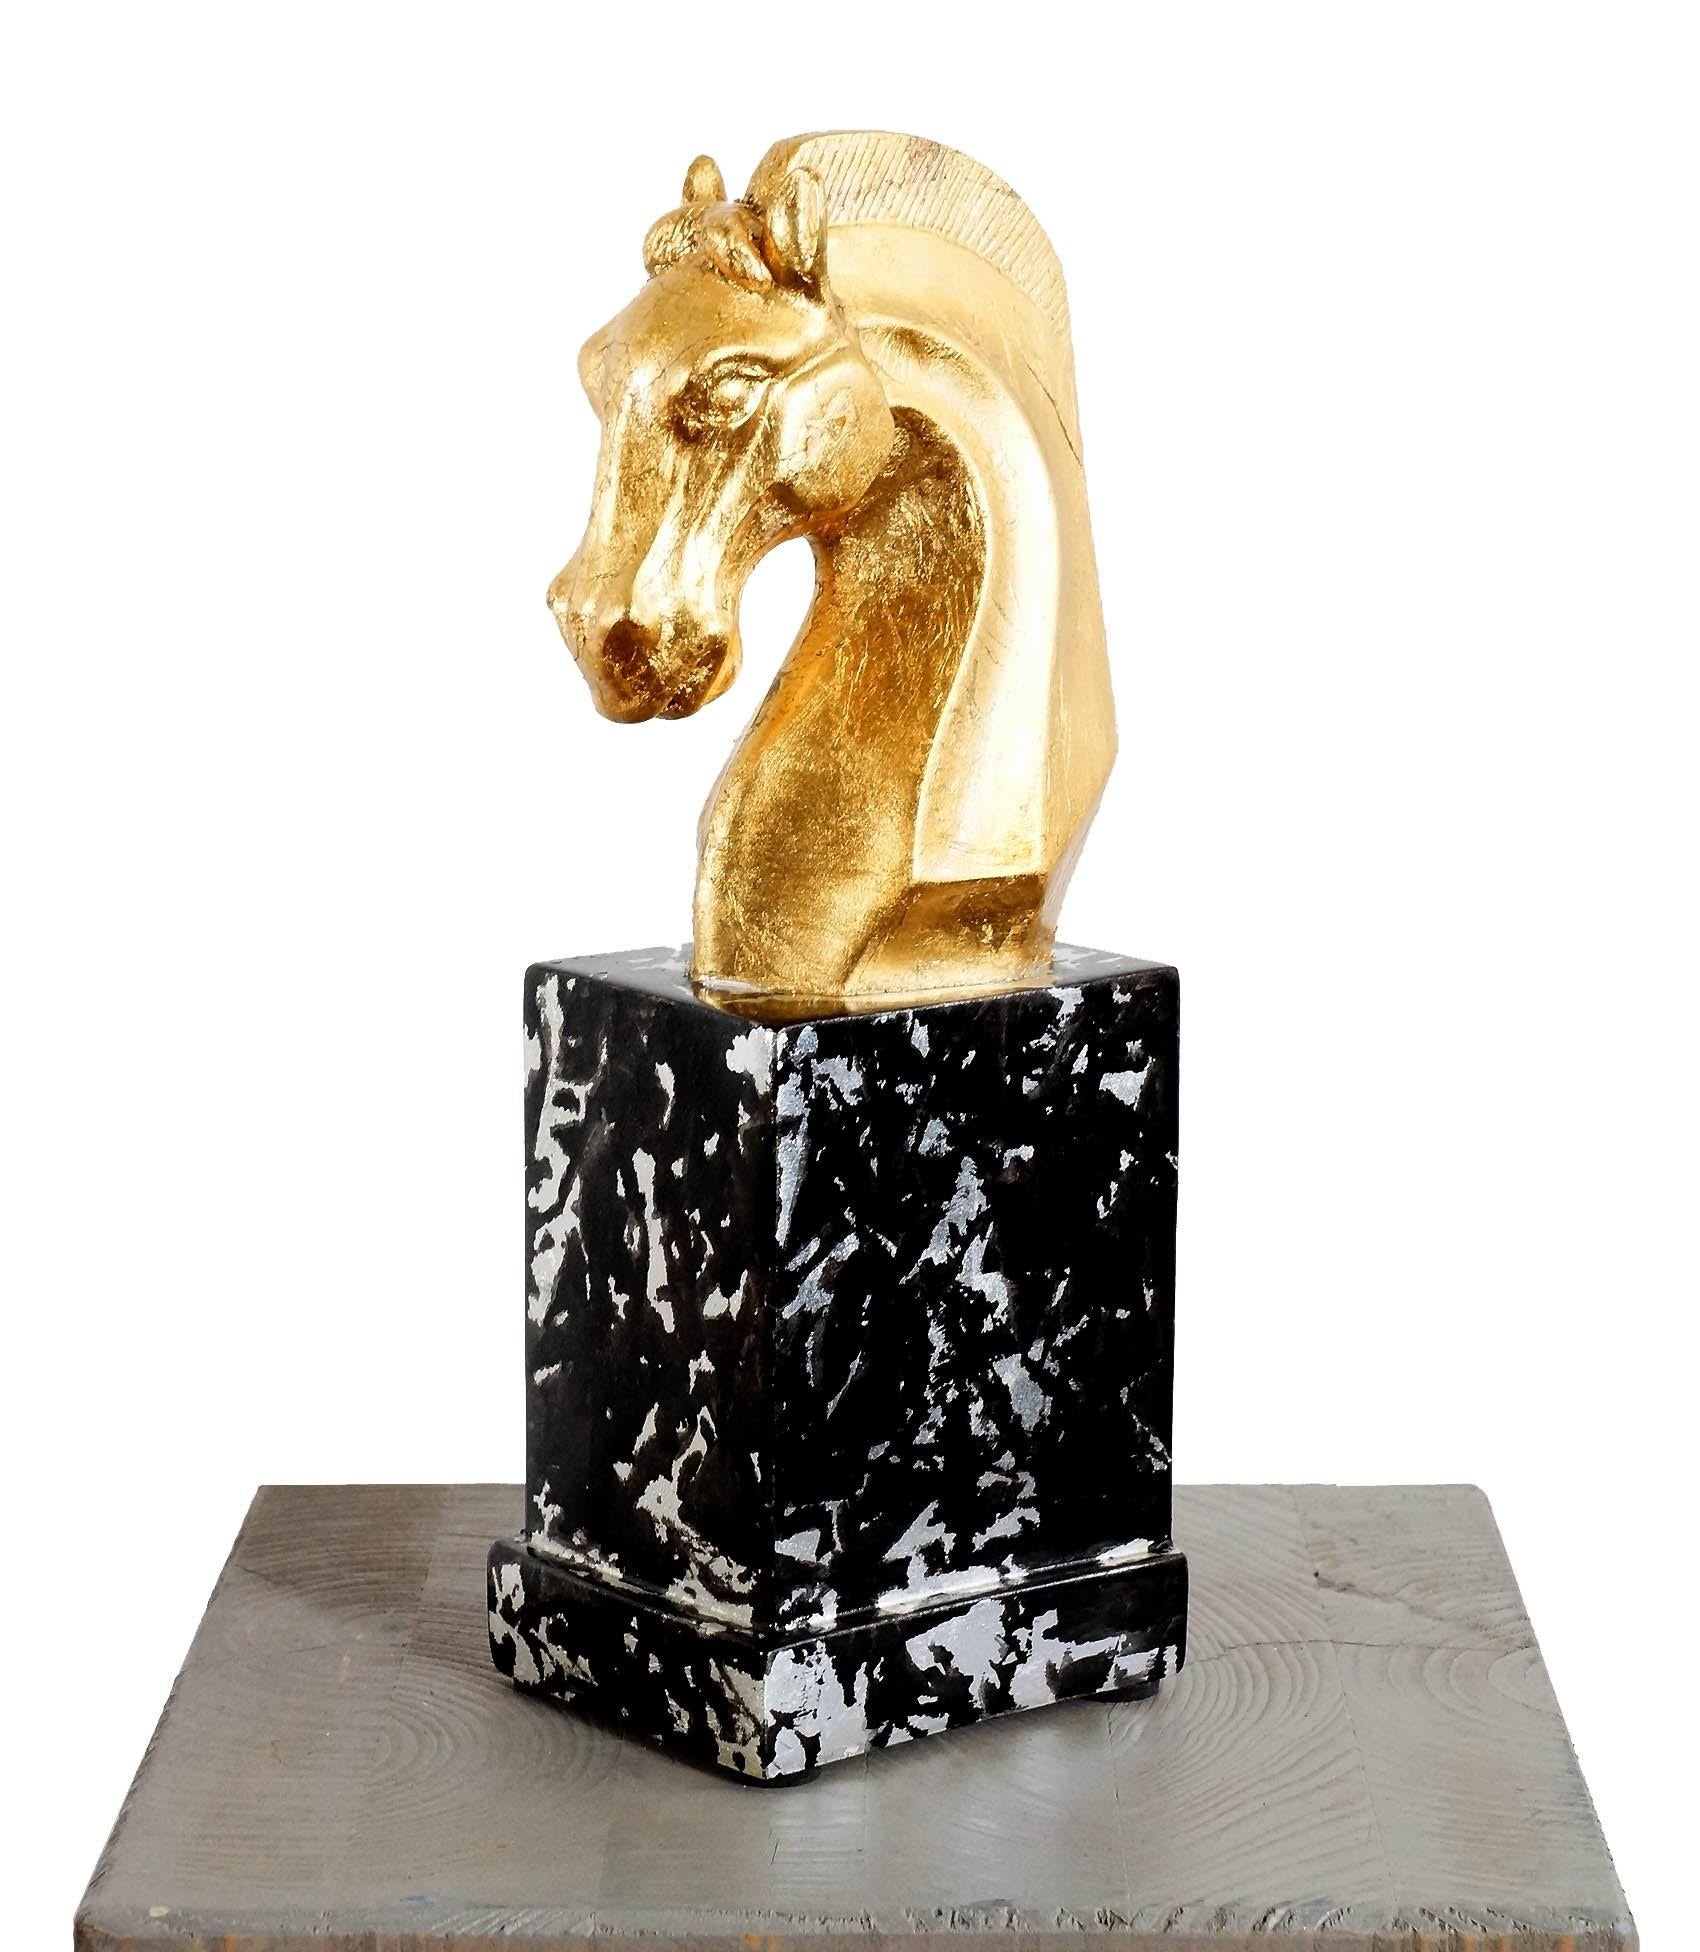 Fiberglass sculpture representing a bust of golden horse, animal sculpture, modern production of beautiful quality.
Estimated production time: 1 to 2 weeks.

H: 25cm, W: 10cm, D: 8cm